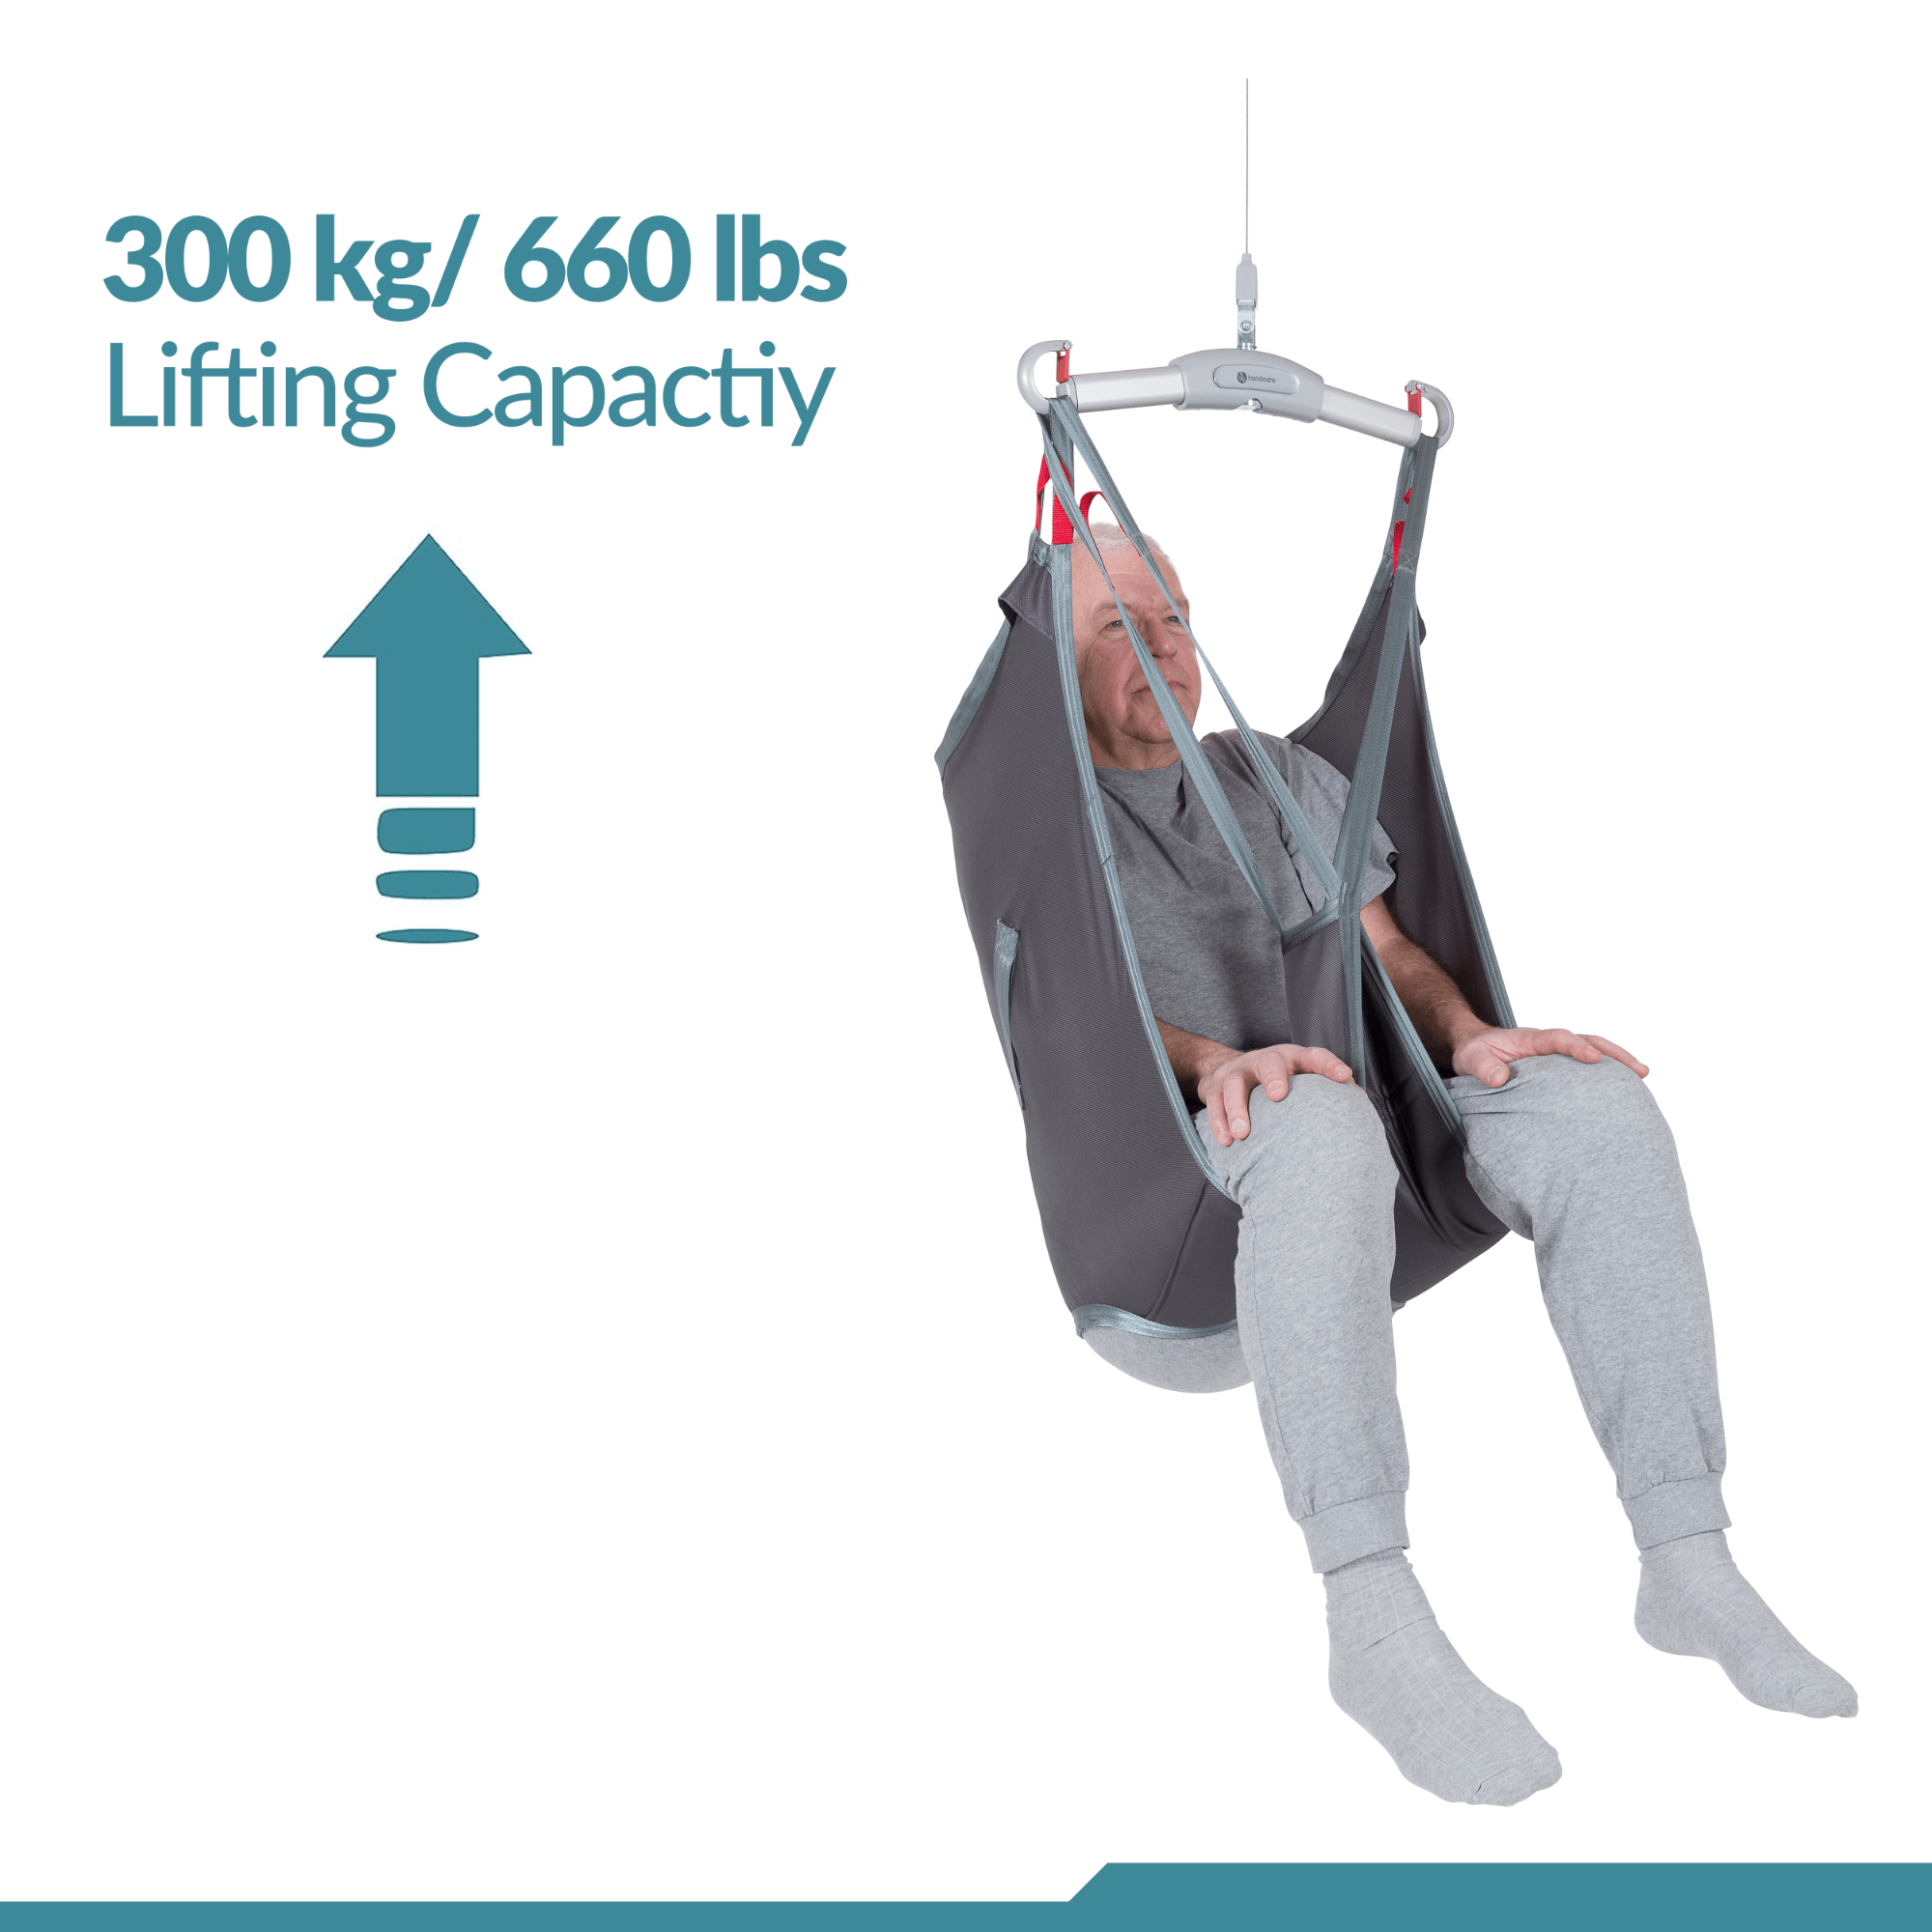 Torso Stability Aid Sling - Universal Patient Lift Sling for Lifts for Home Use - Transfer Safely with Patient Lifter - Compatible with Hoyer Lift - Easy-to-Use